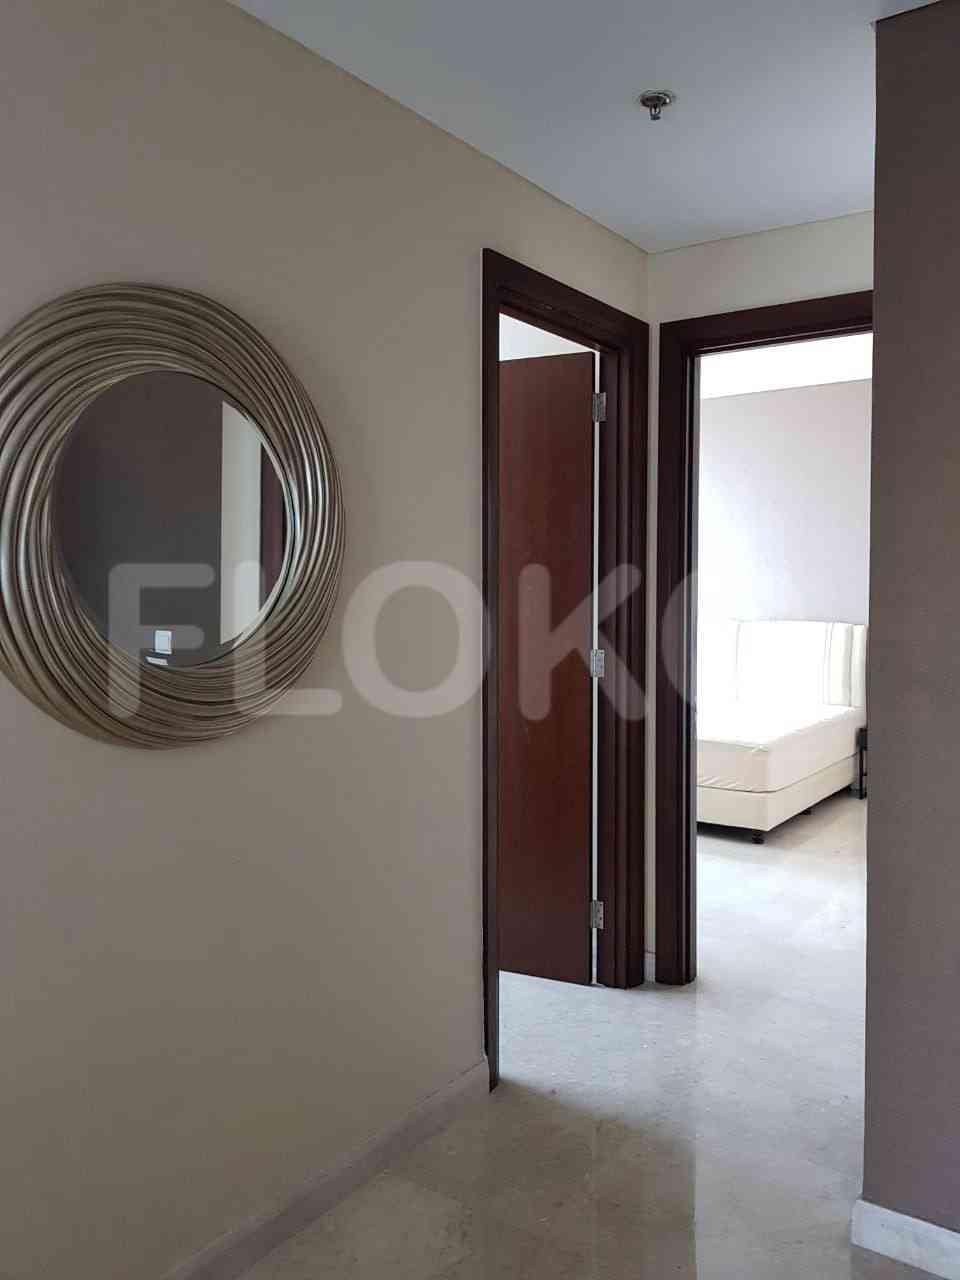 2 Bedroom on 16th Floor for Rent in Essence Darmawangsa Apartment - fcife4 4